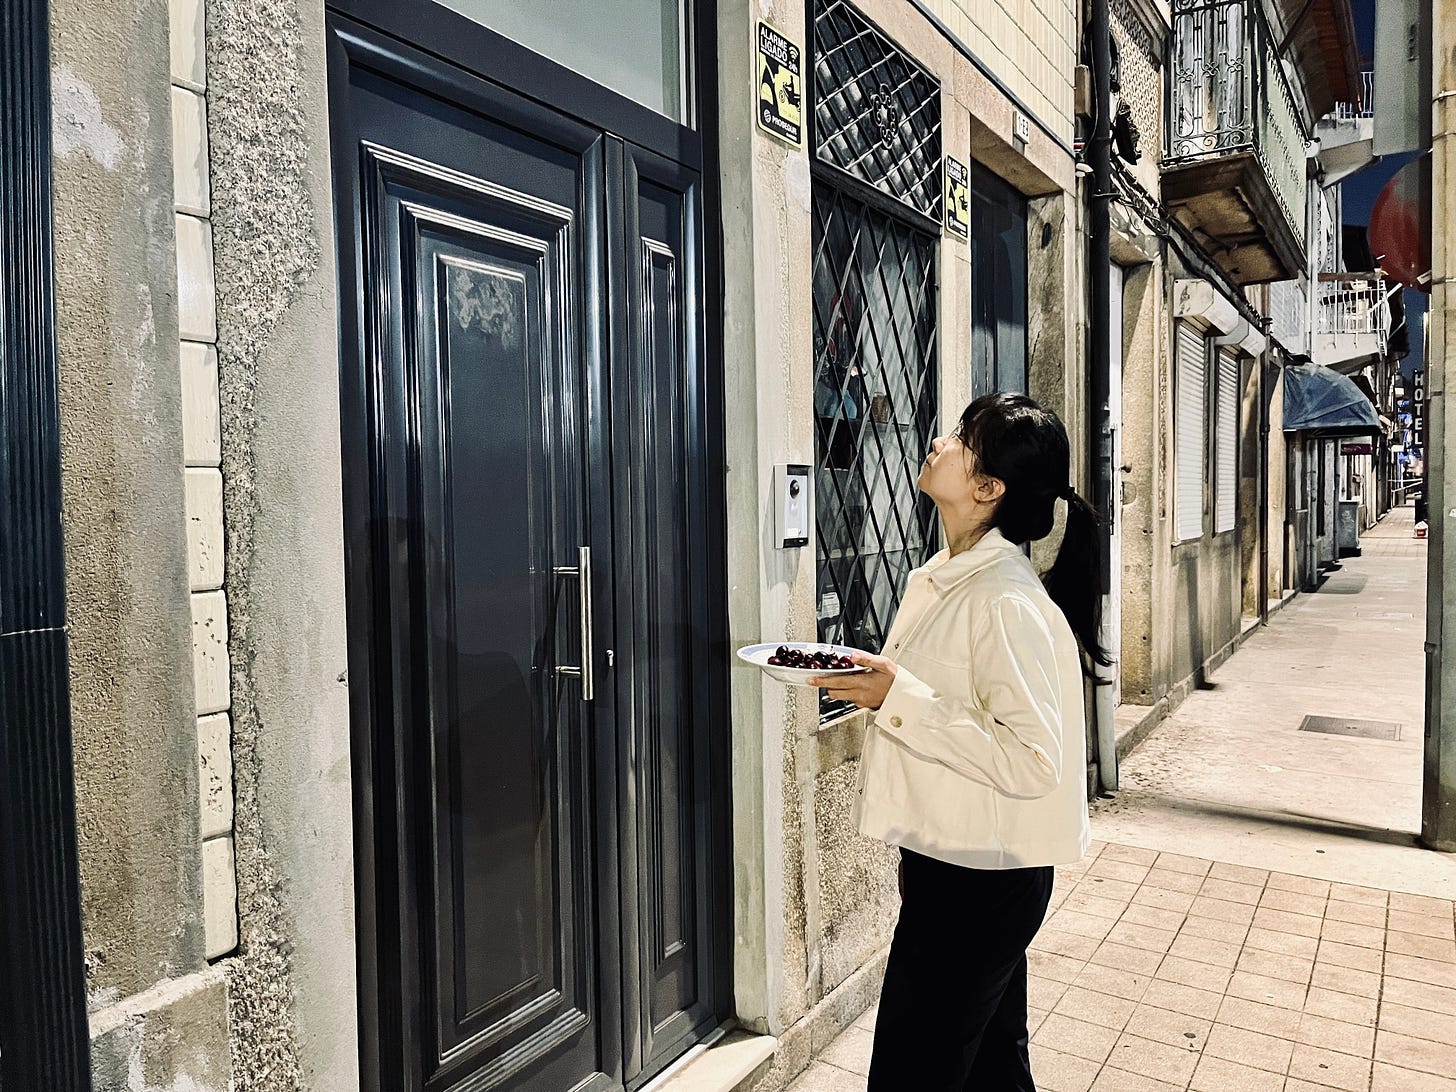 Image: Photo of me, at night, wearing a cream colour light summer jacket, hair tied up to a ponytail, holding a plate of cherries, looking upwards to my neighbour’s door, waiting for them to open the door for my husband and me. The background shows a curving row of shops and houses alongside a road with streetlights. 